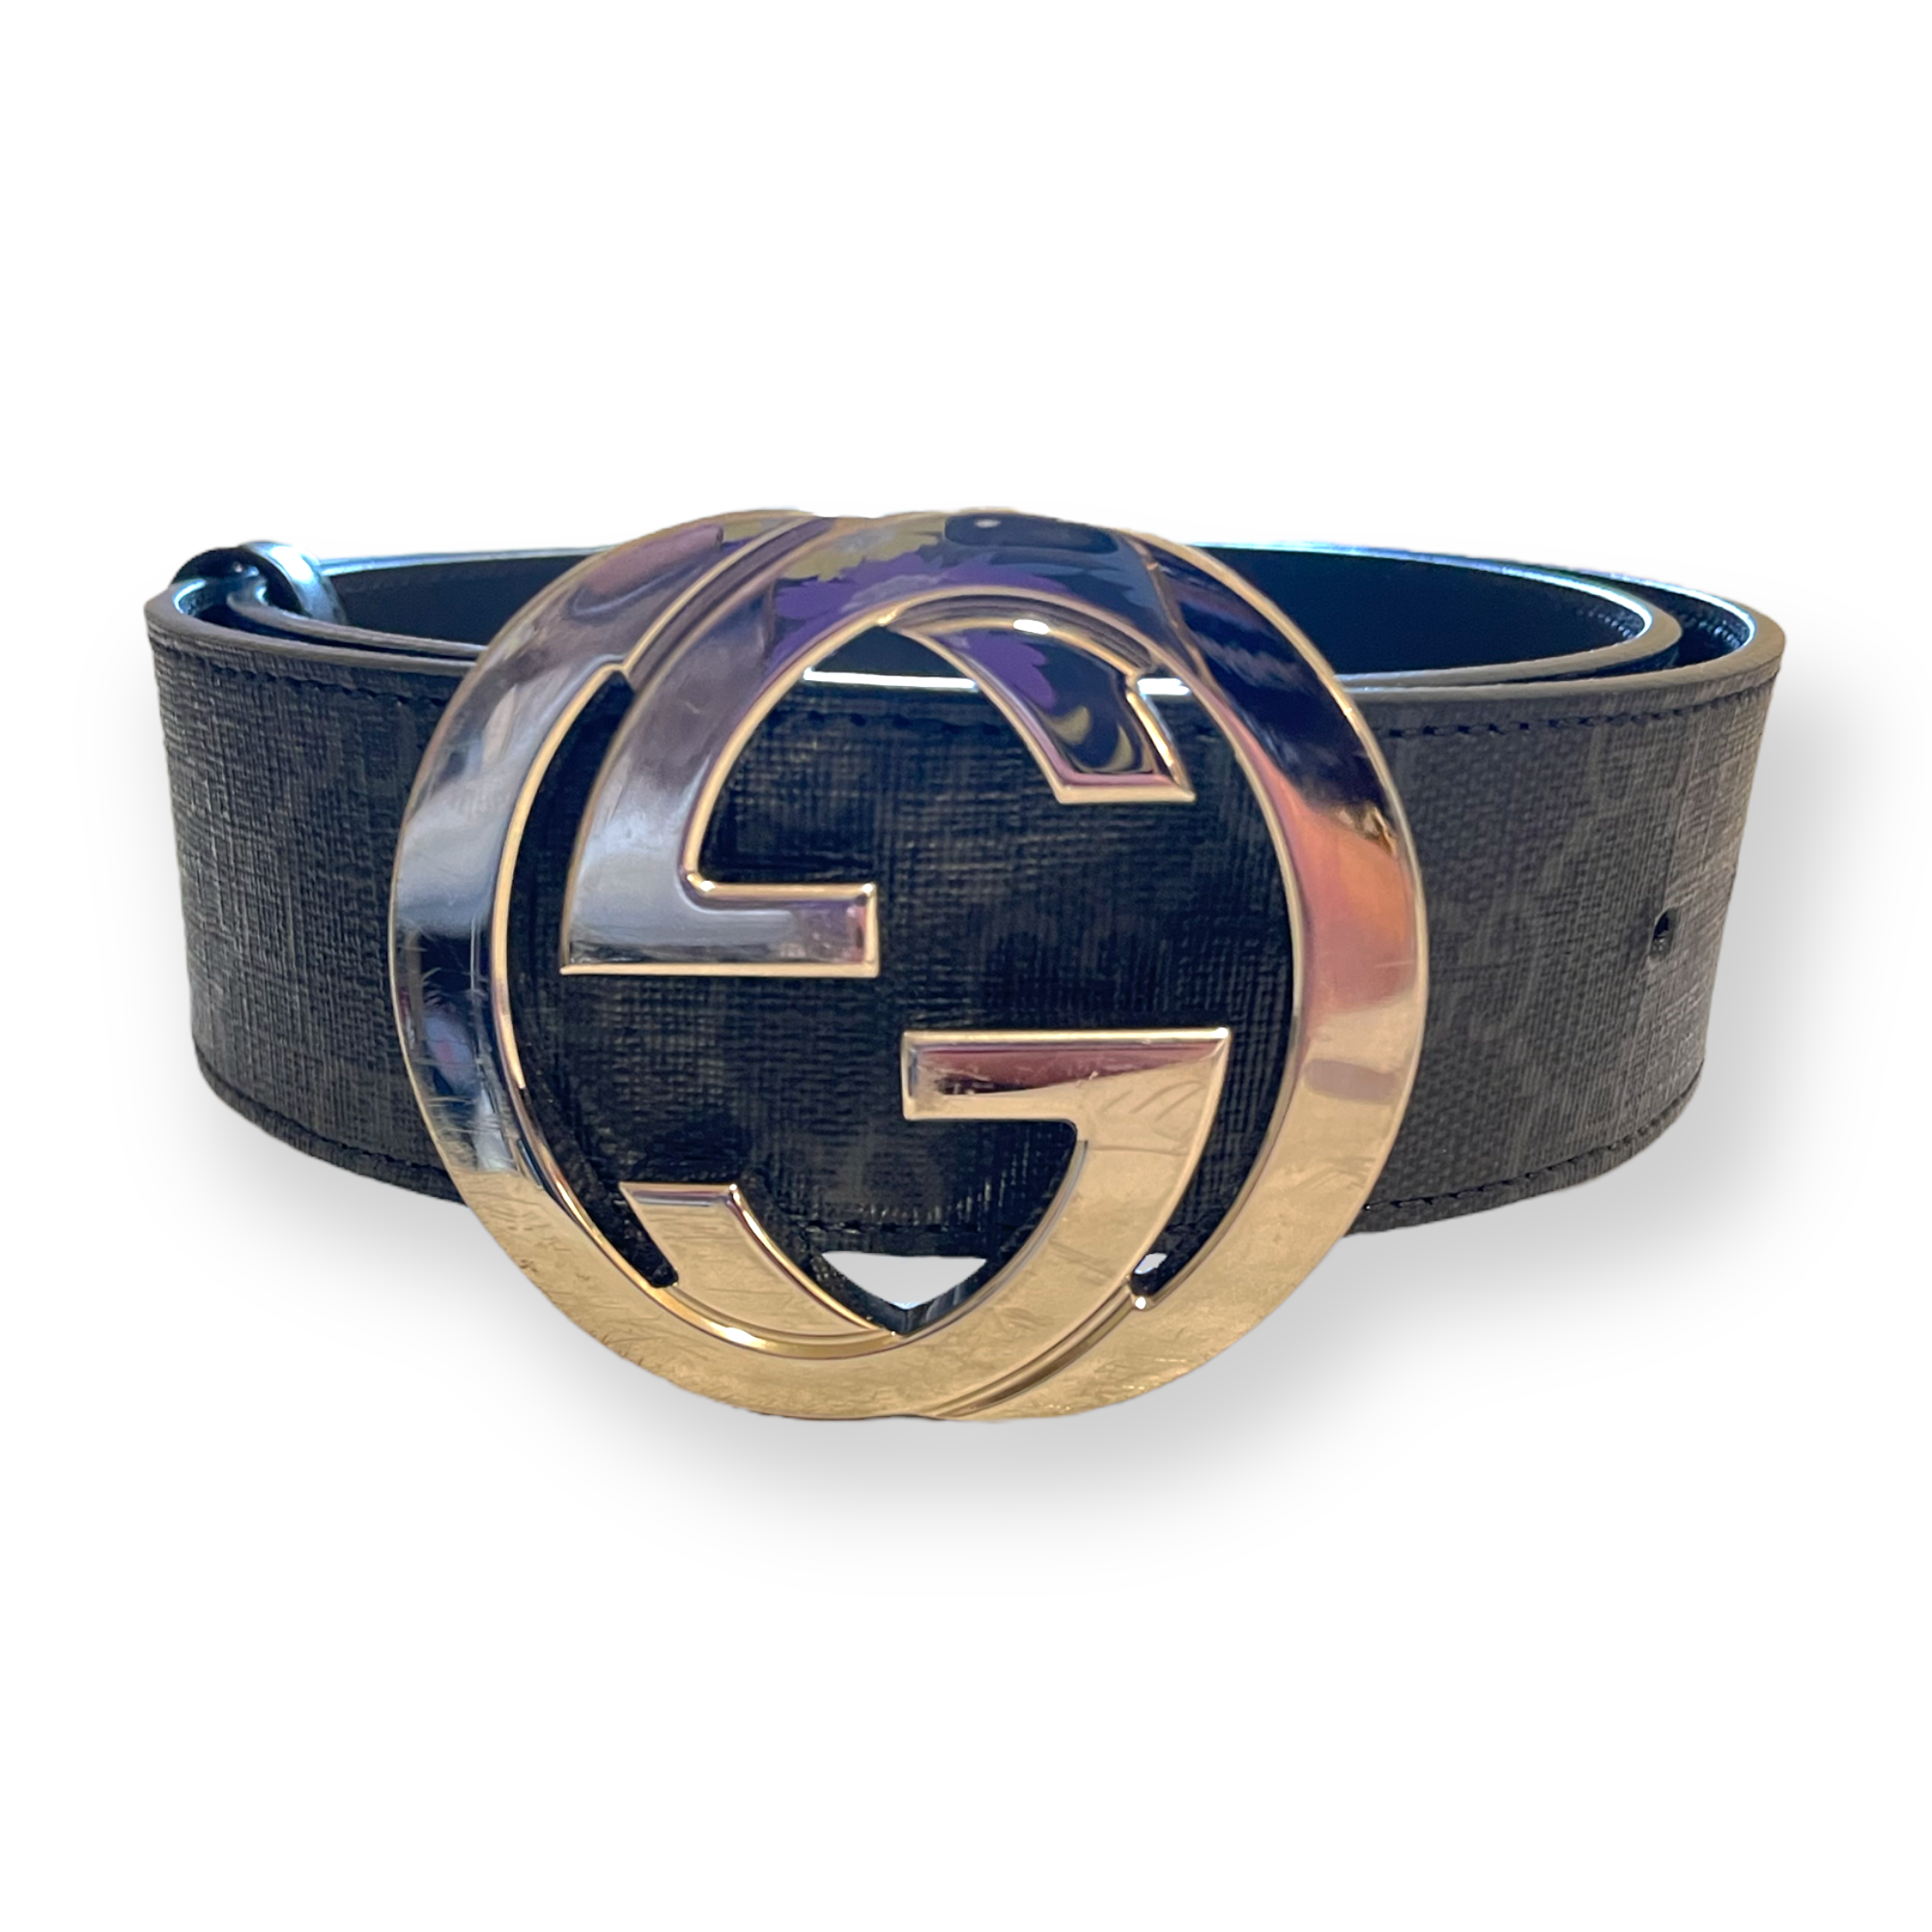 A GUCCI GG Supreme canvas belt finished with interlocking G buckle |Size: 80/32|